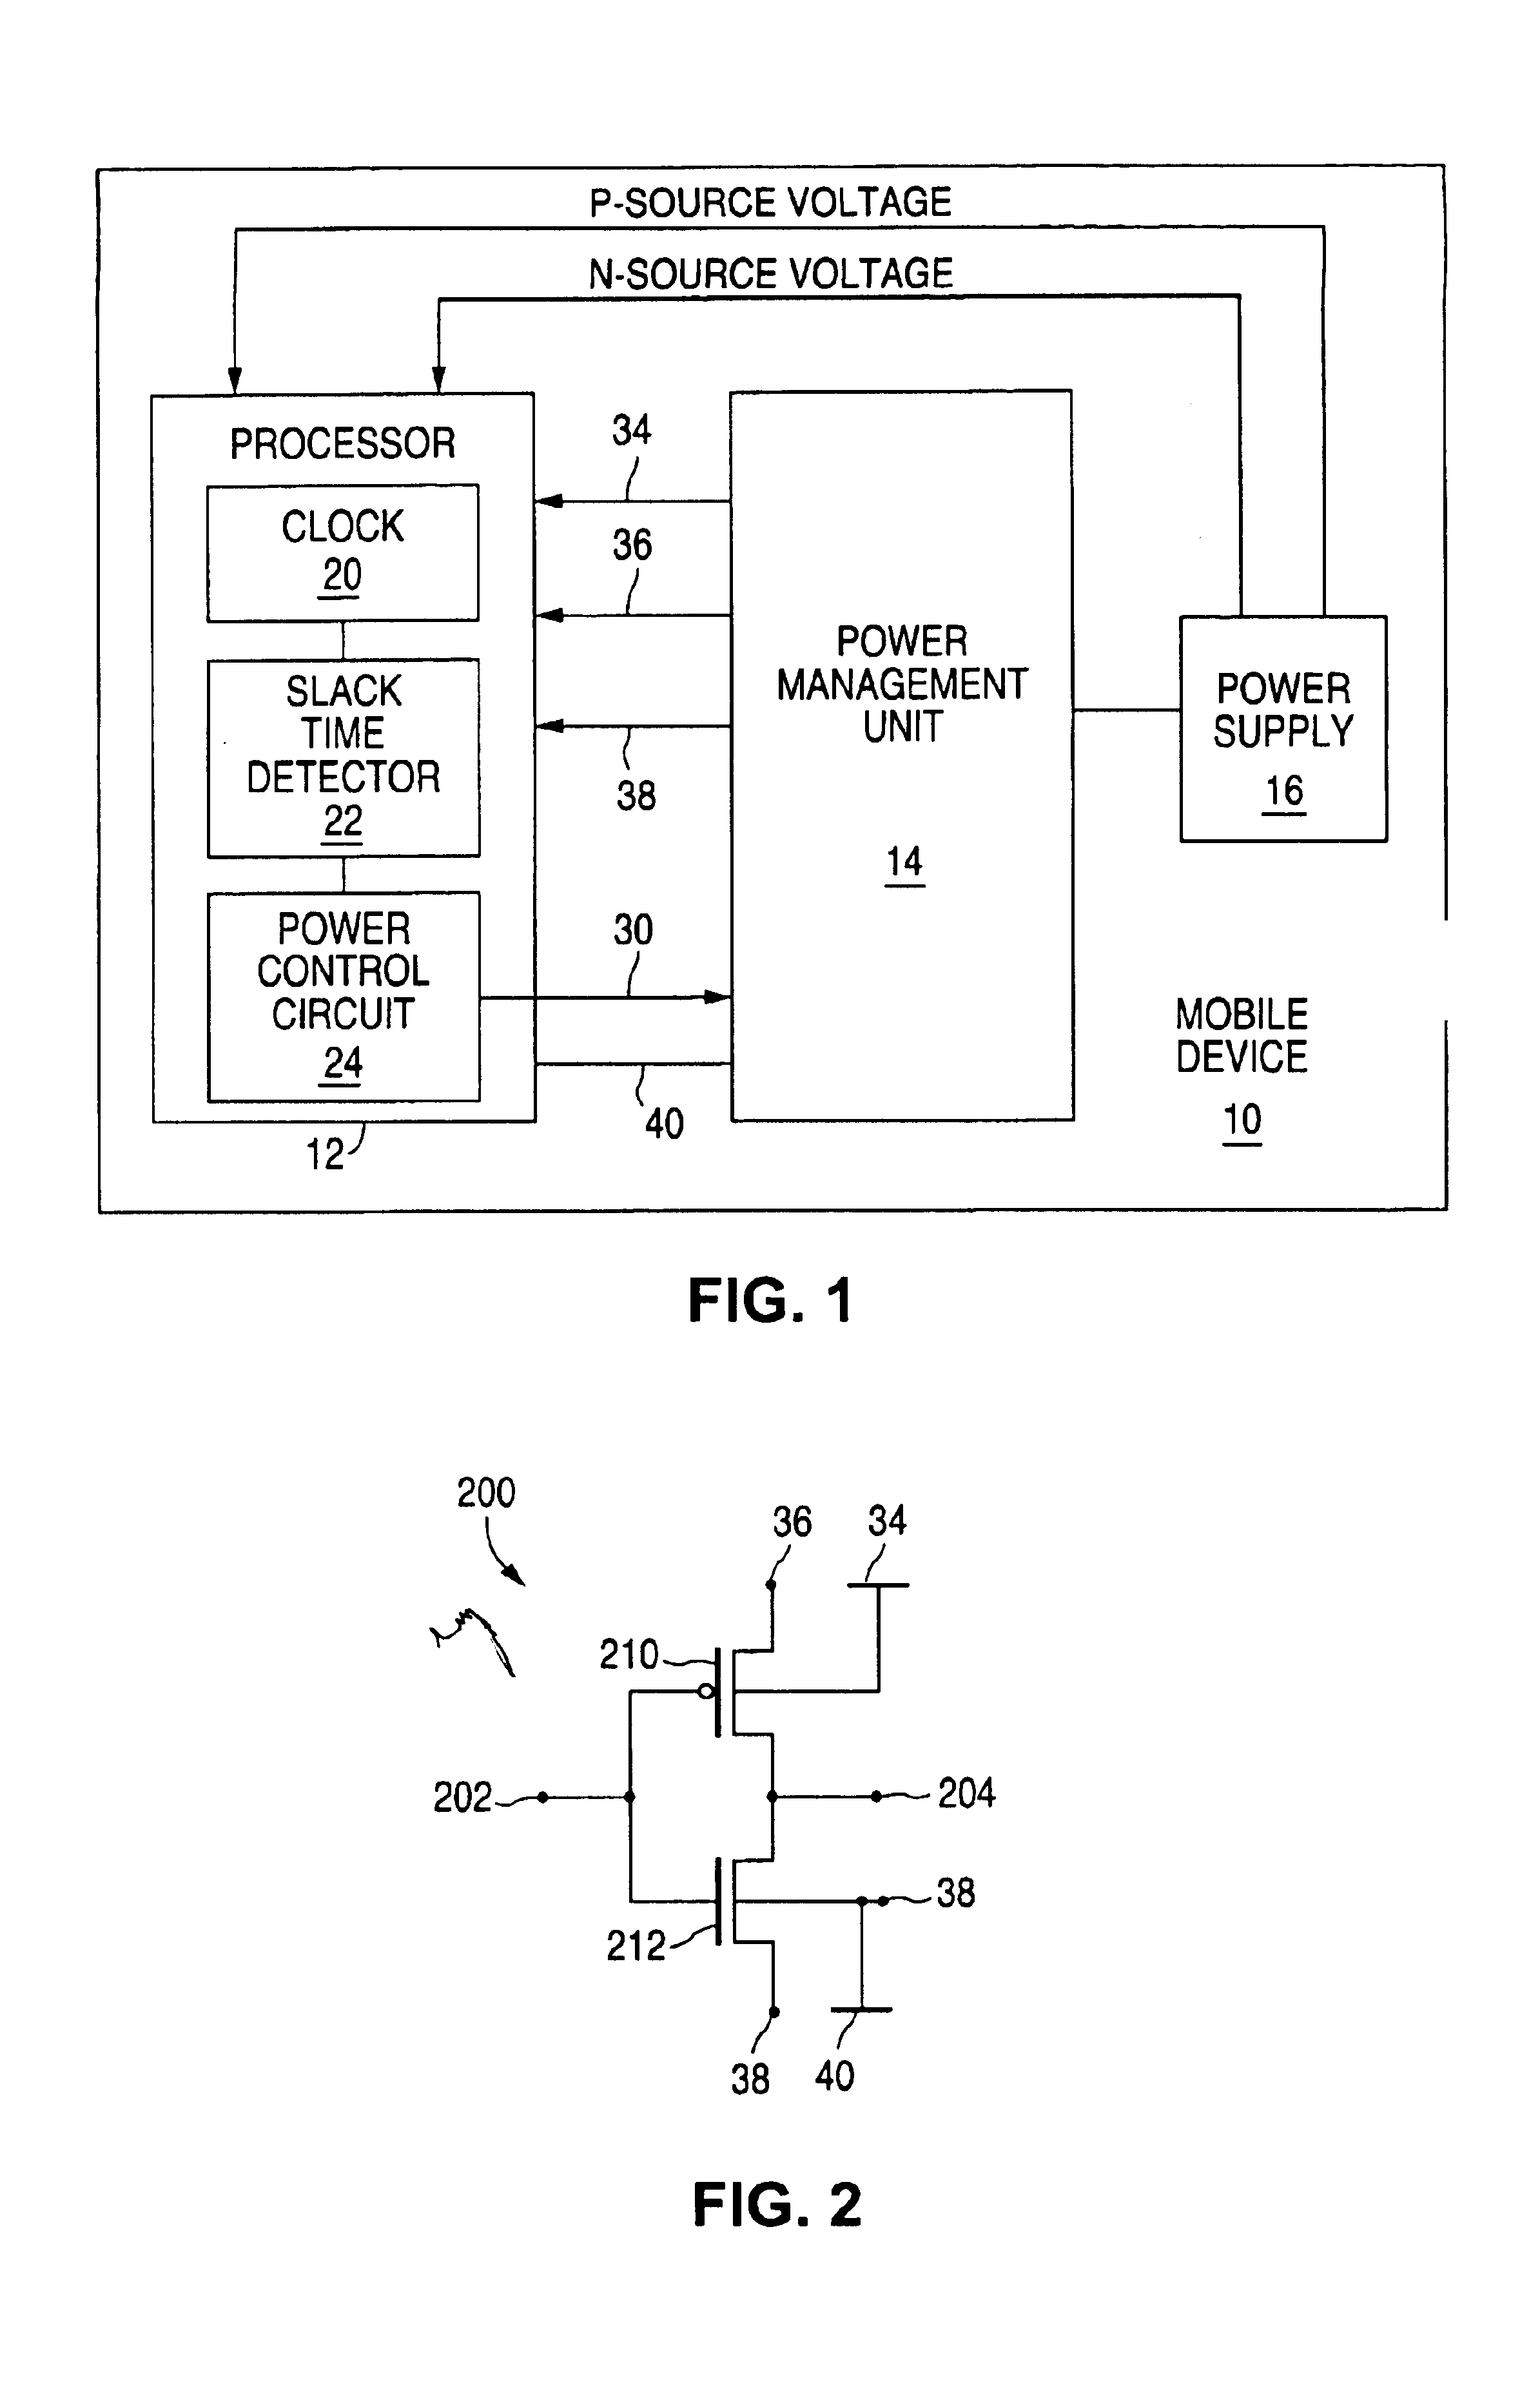 Method and system for reducing leakage current in integrated circuits using adaptively adjusted source voltages